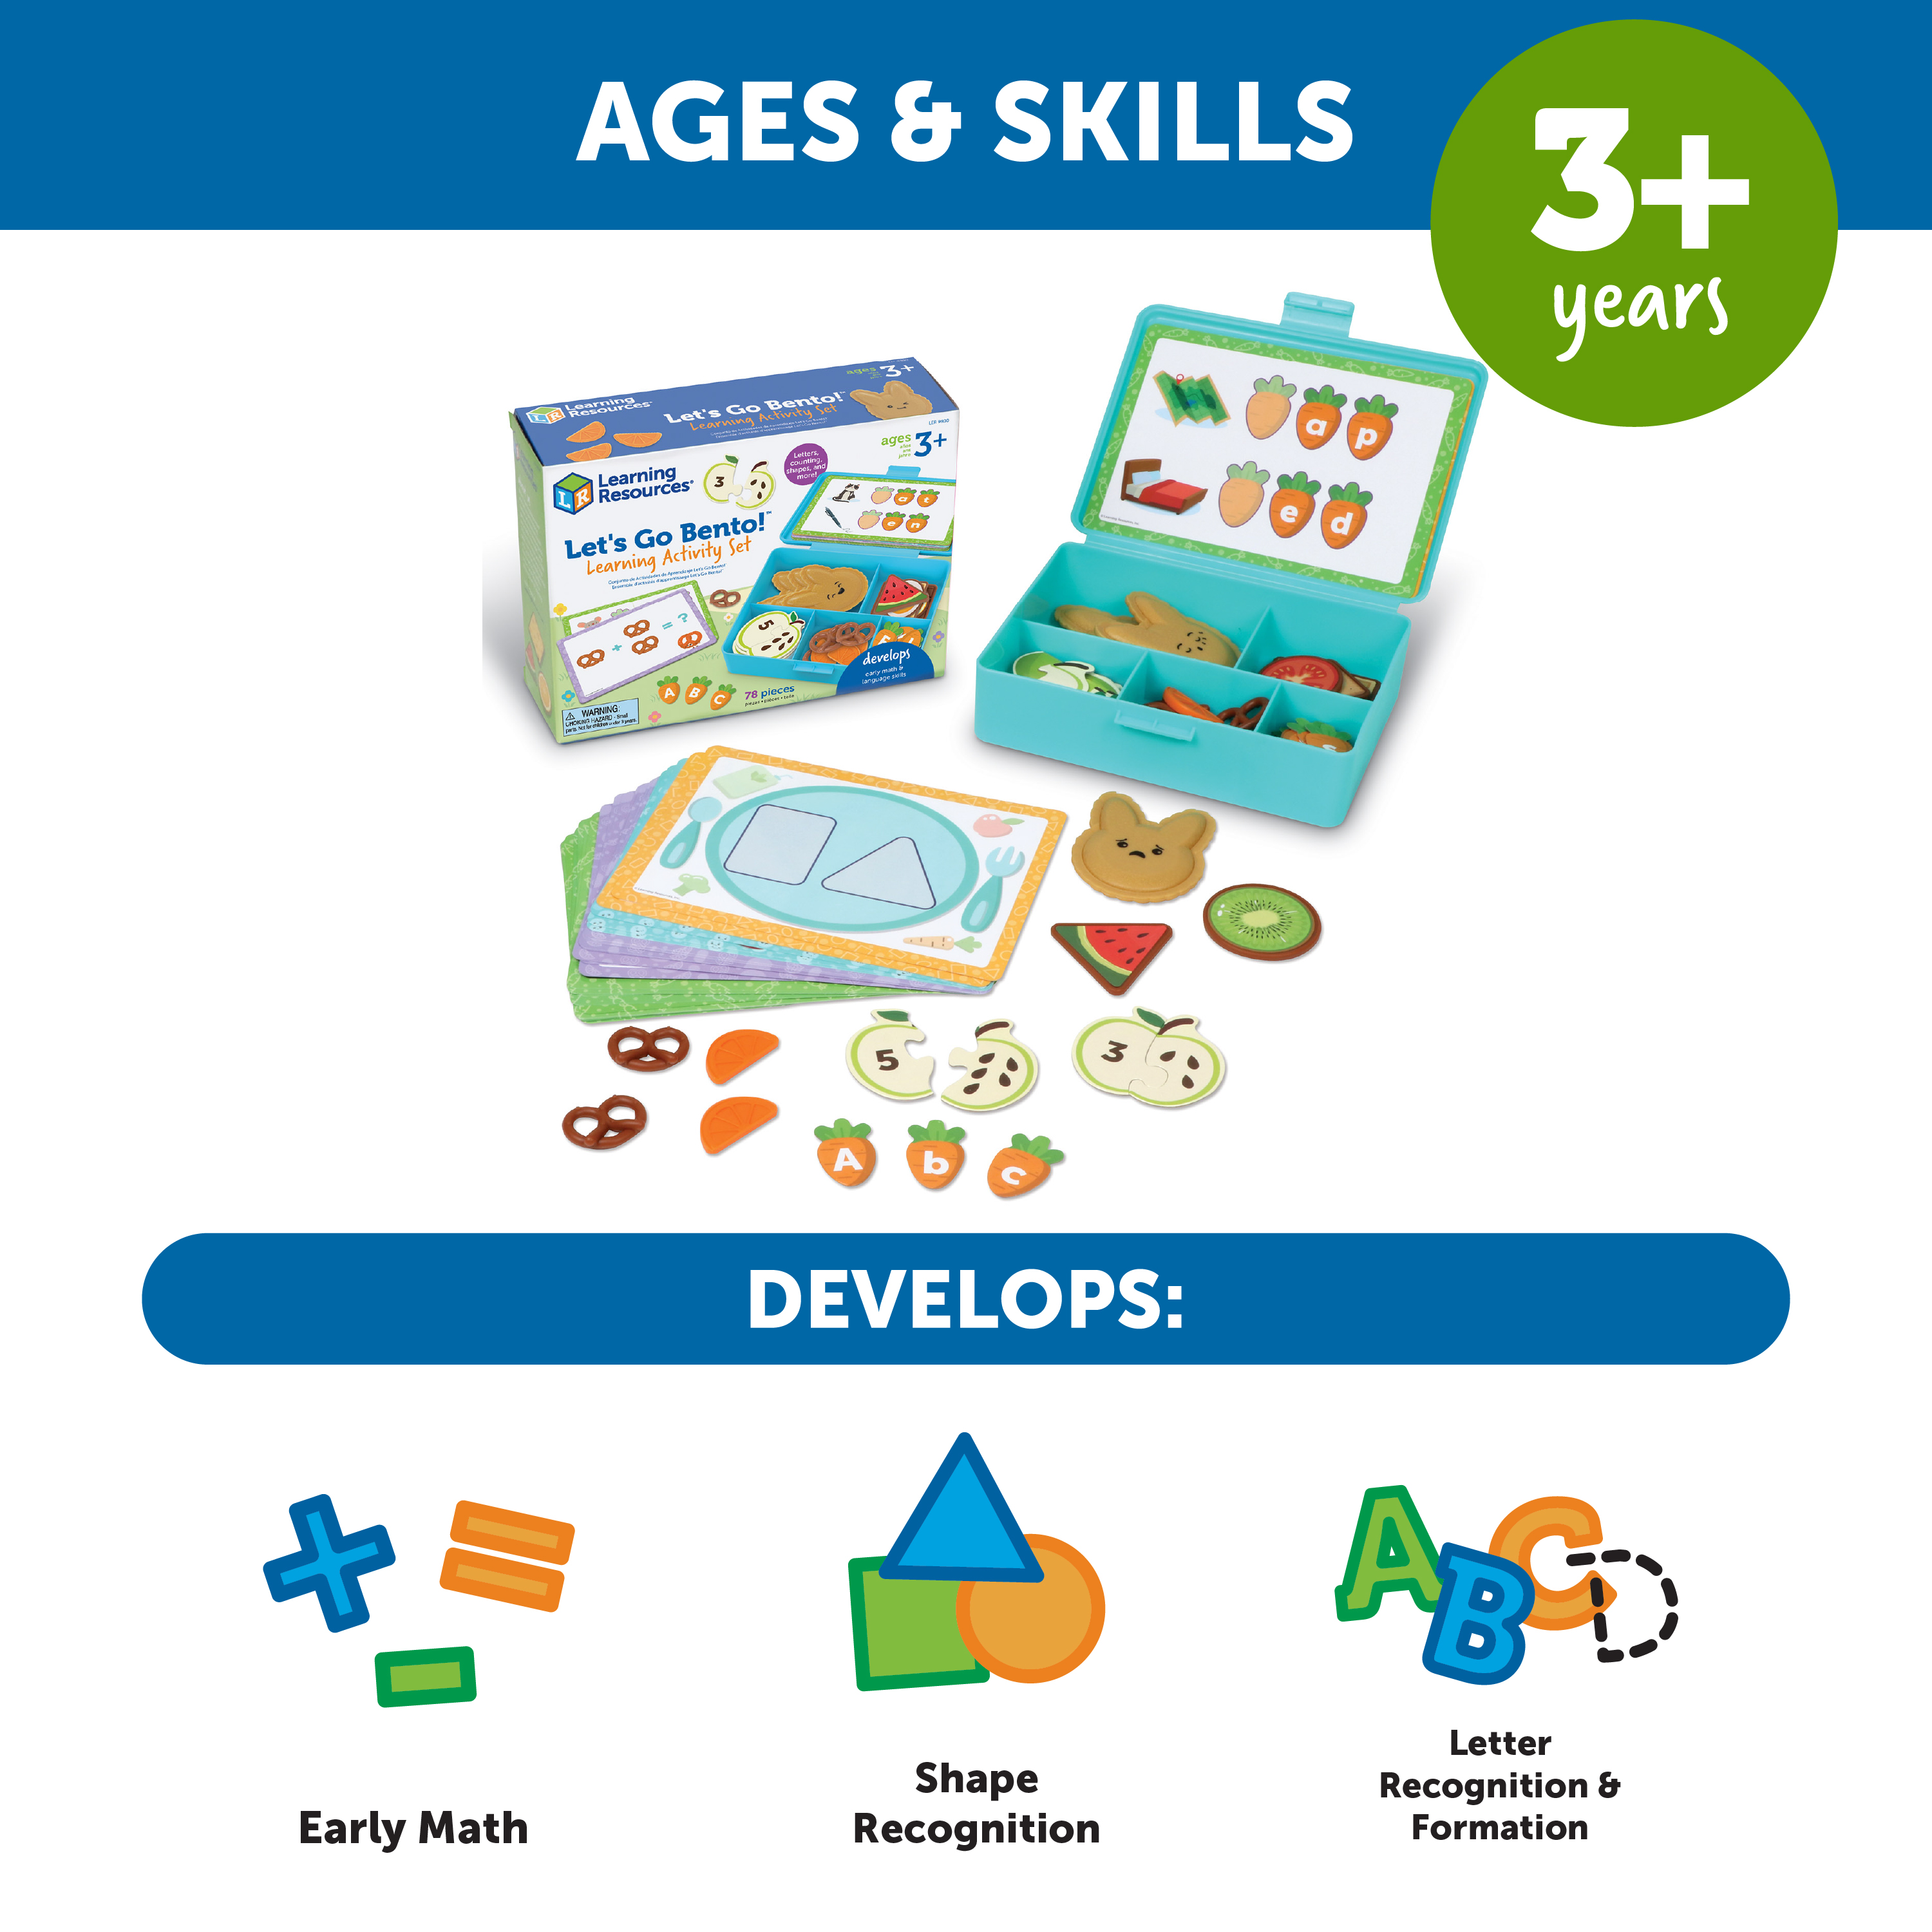 Learning Resources Let's Go Bento! Learning Activity Set - 78 pieces, Bento Box Toy for Boys and Girls Ages 18+ months - image 5 of 8